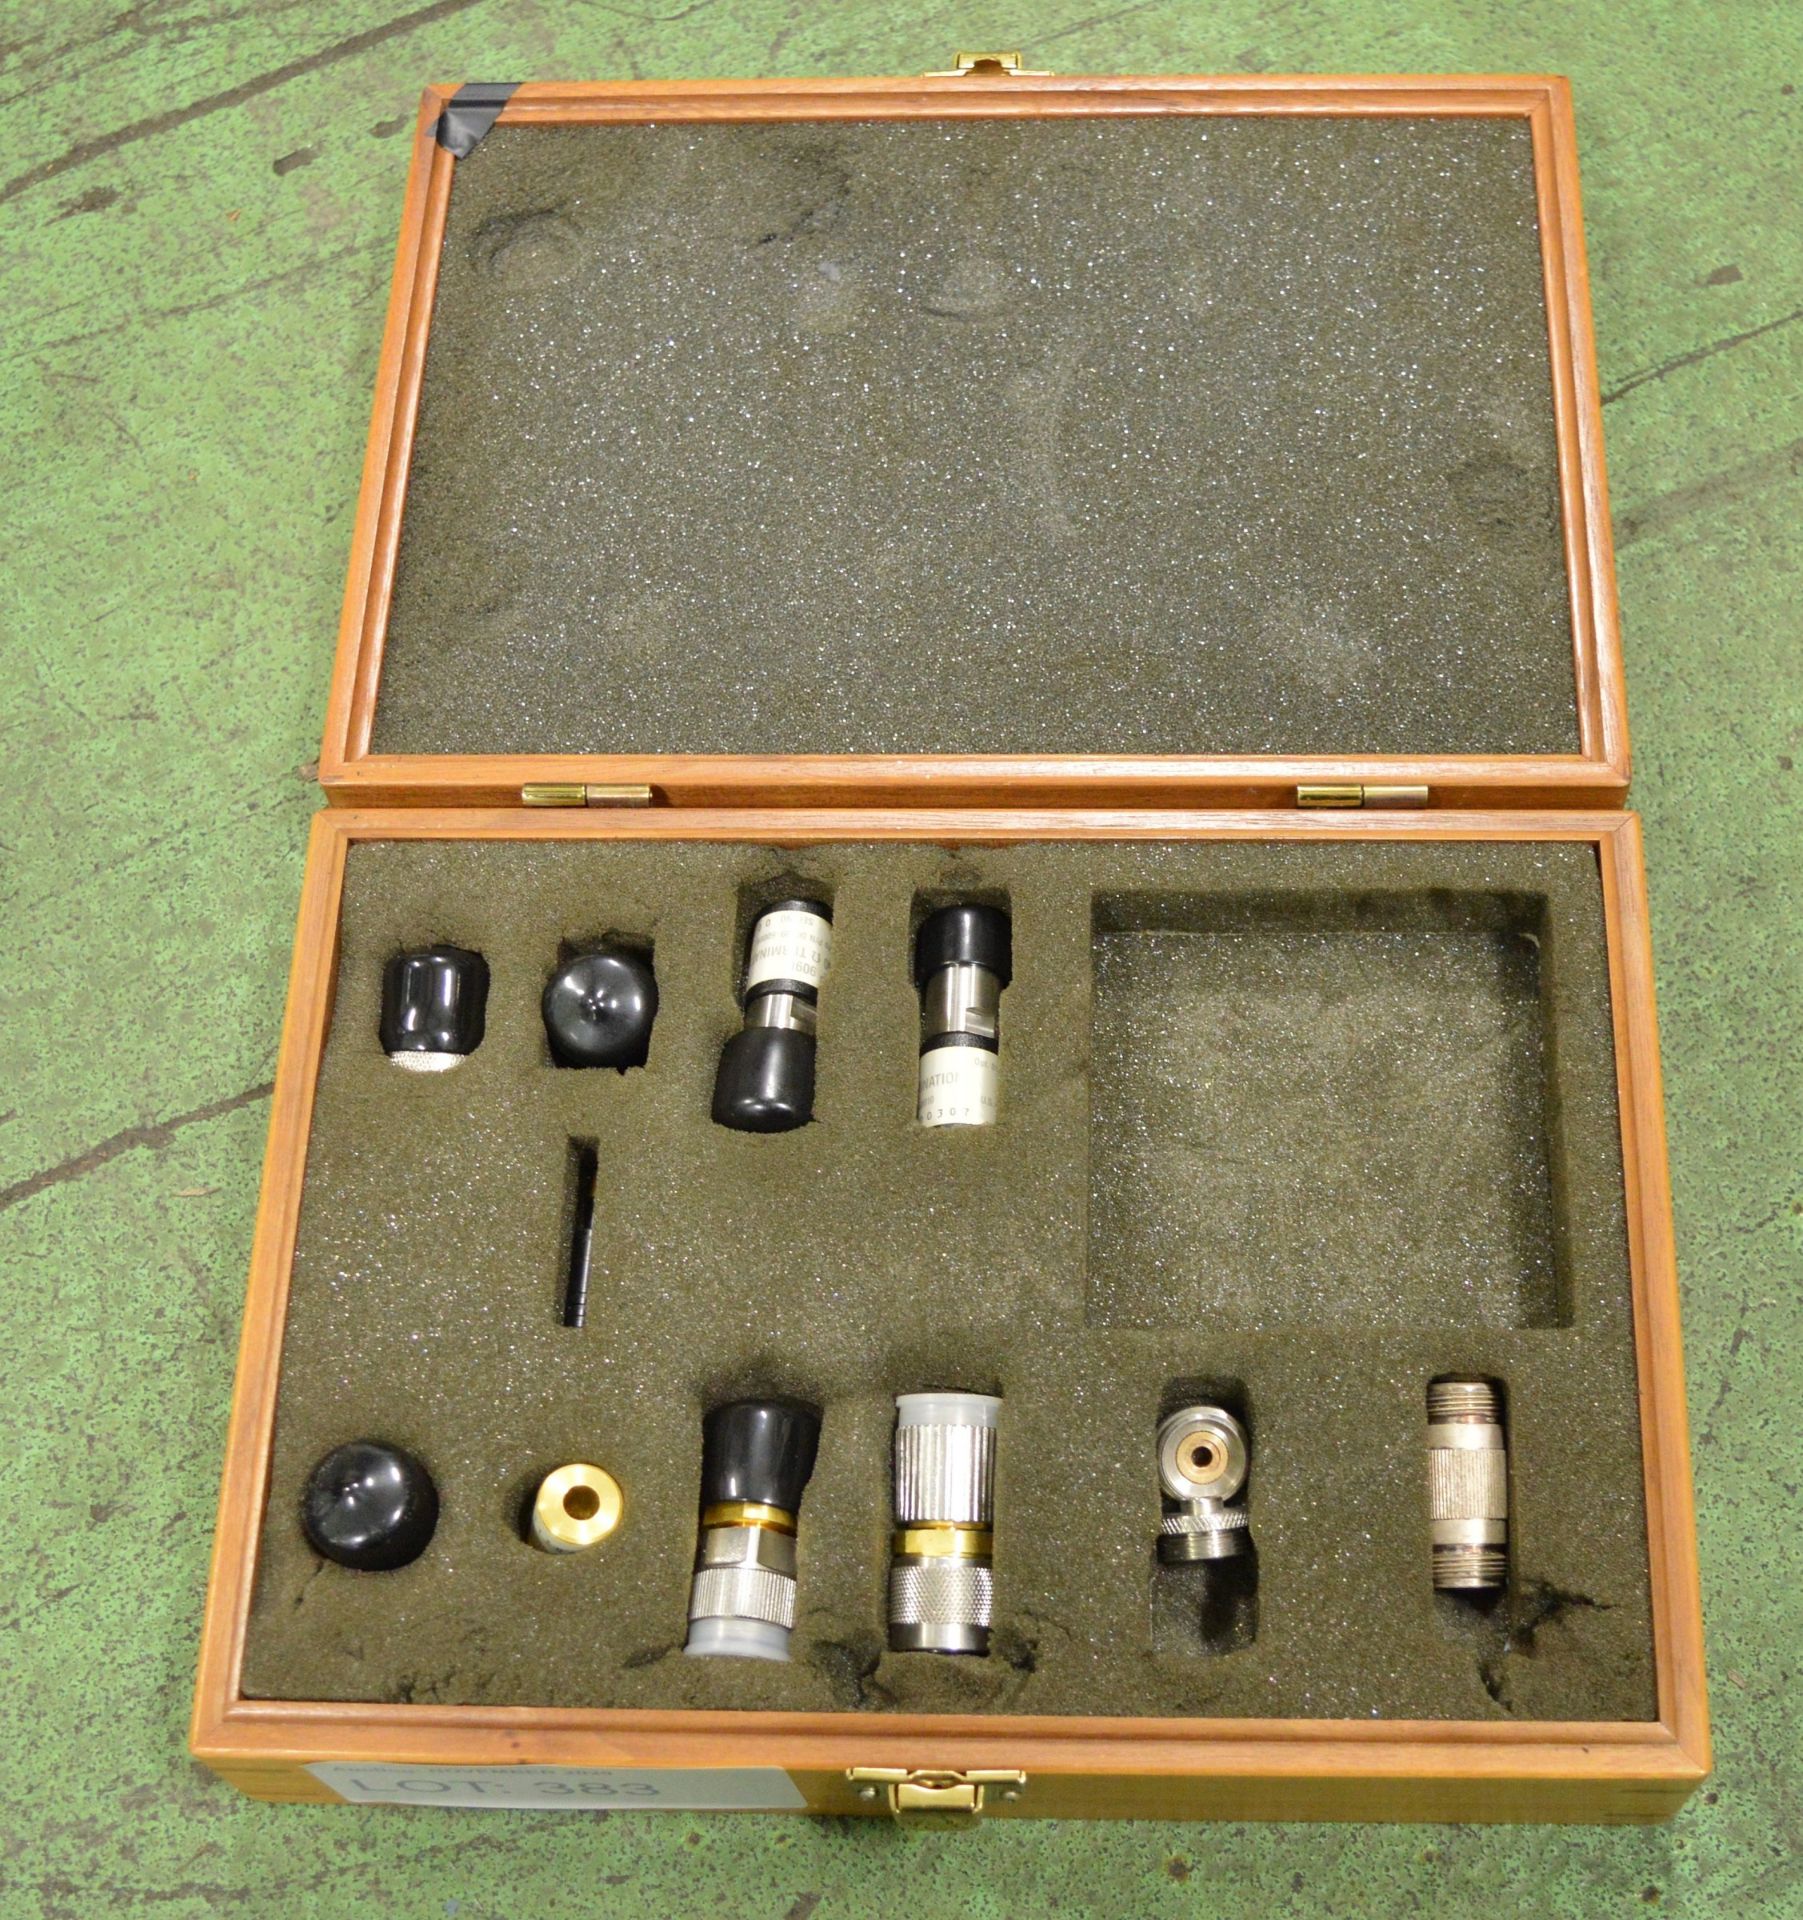 HP 85032B Calibration Kit In a Wooden Box (Incomplete)